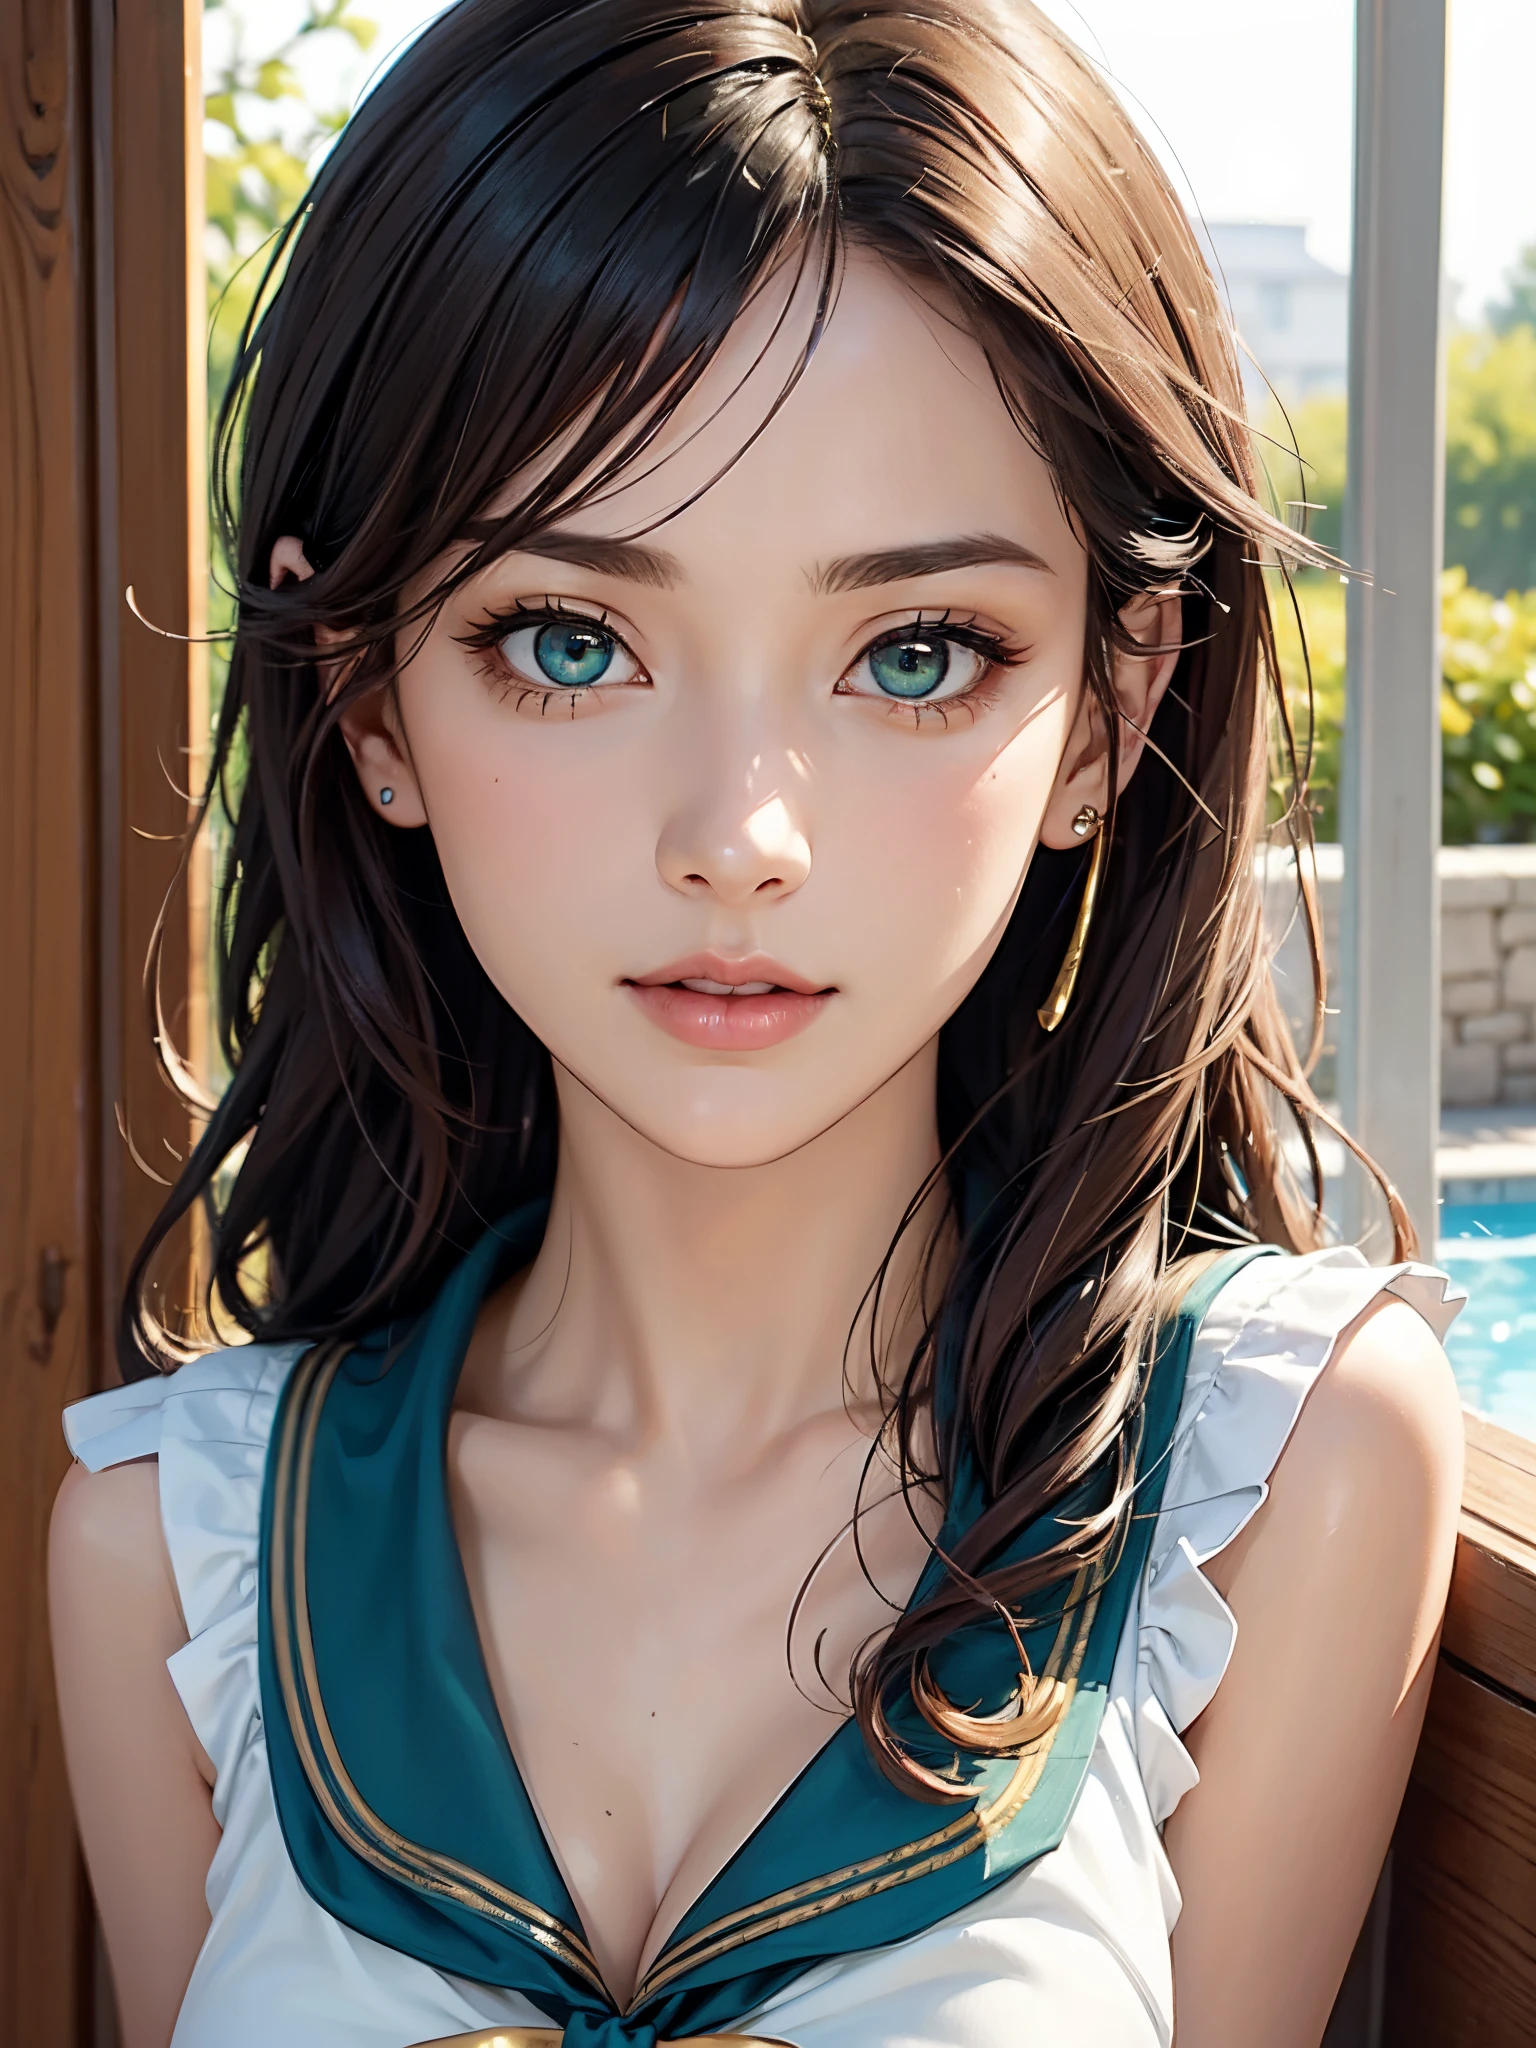 masutepiece, Best Quality, High quality, High Definition, high quality texture, high quality shadow, high detailing, Beautiful detailed, Finely detailed, extremely details CG, Detailed texture, realistic representation of face, Realistic, Colorful, Delicate, Cinematic Light, side lights, Lens Flare, Ray tracing, Sharp Focus, (Intricate details, makeup, pureerosface_v1:0.5), (Detailed beautiful delicate face, Detailed beautiful delicate eyes, A perfectly proportioned face, High detailed skin, Detailed skin, best ratio four finger and one thumb, upperbody shot,  (Large breasts), (cleavage),  ((Smooth texture, Realistic texture, Photorealistic)),  (Detailed beautiful eyes, Beautiful eyelashes, Green eyes), (((green eyes))), (golden semi-long hair), (golden hair), 1 woman,  at poolside,  (((sailor shirt, Sleeveless, Open front))),   (Beautiful face, Cute face, Detailed face),   Sunny, Perfect Eyes Eyes